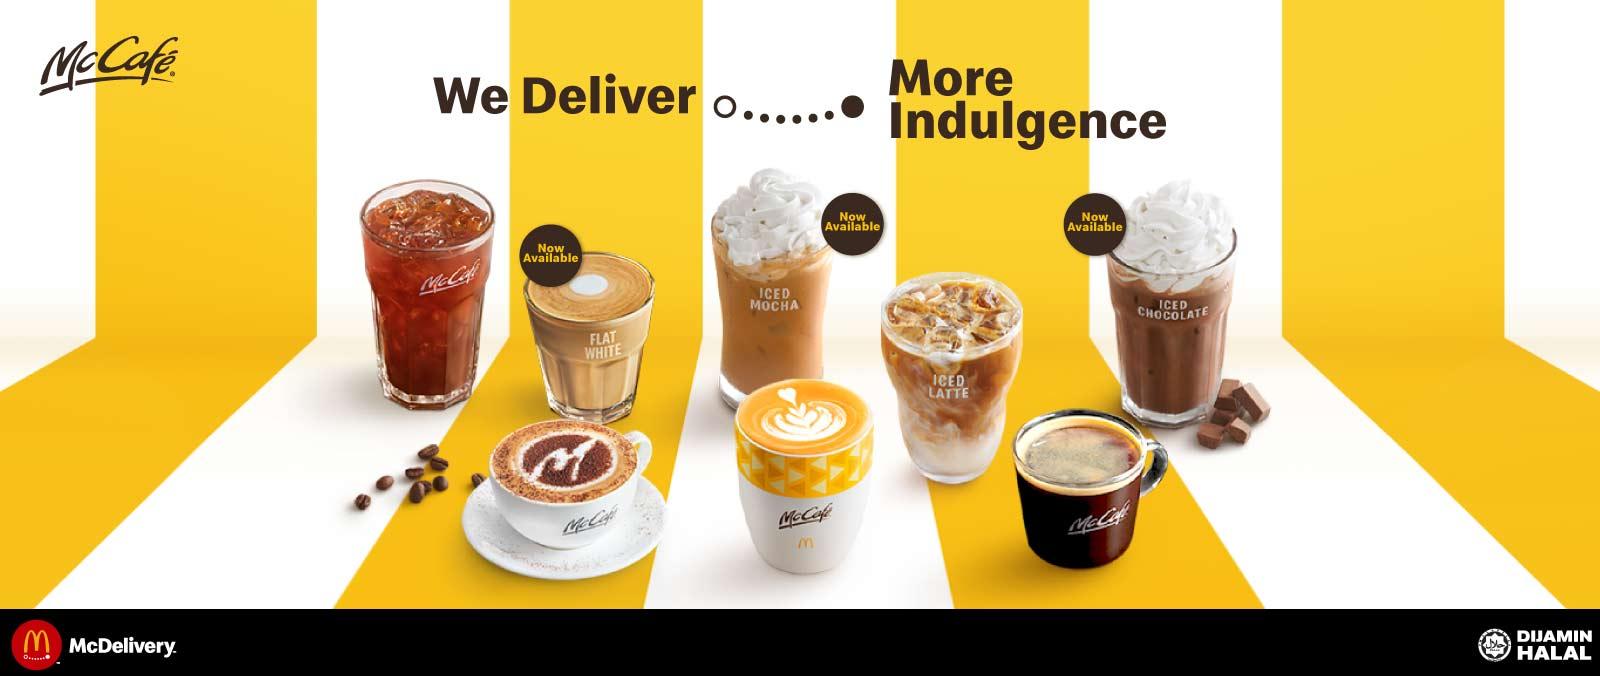 A Taste For Every Feeling With McCafe's image'